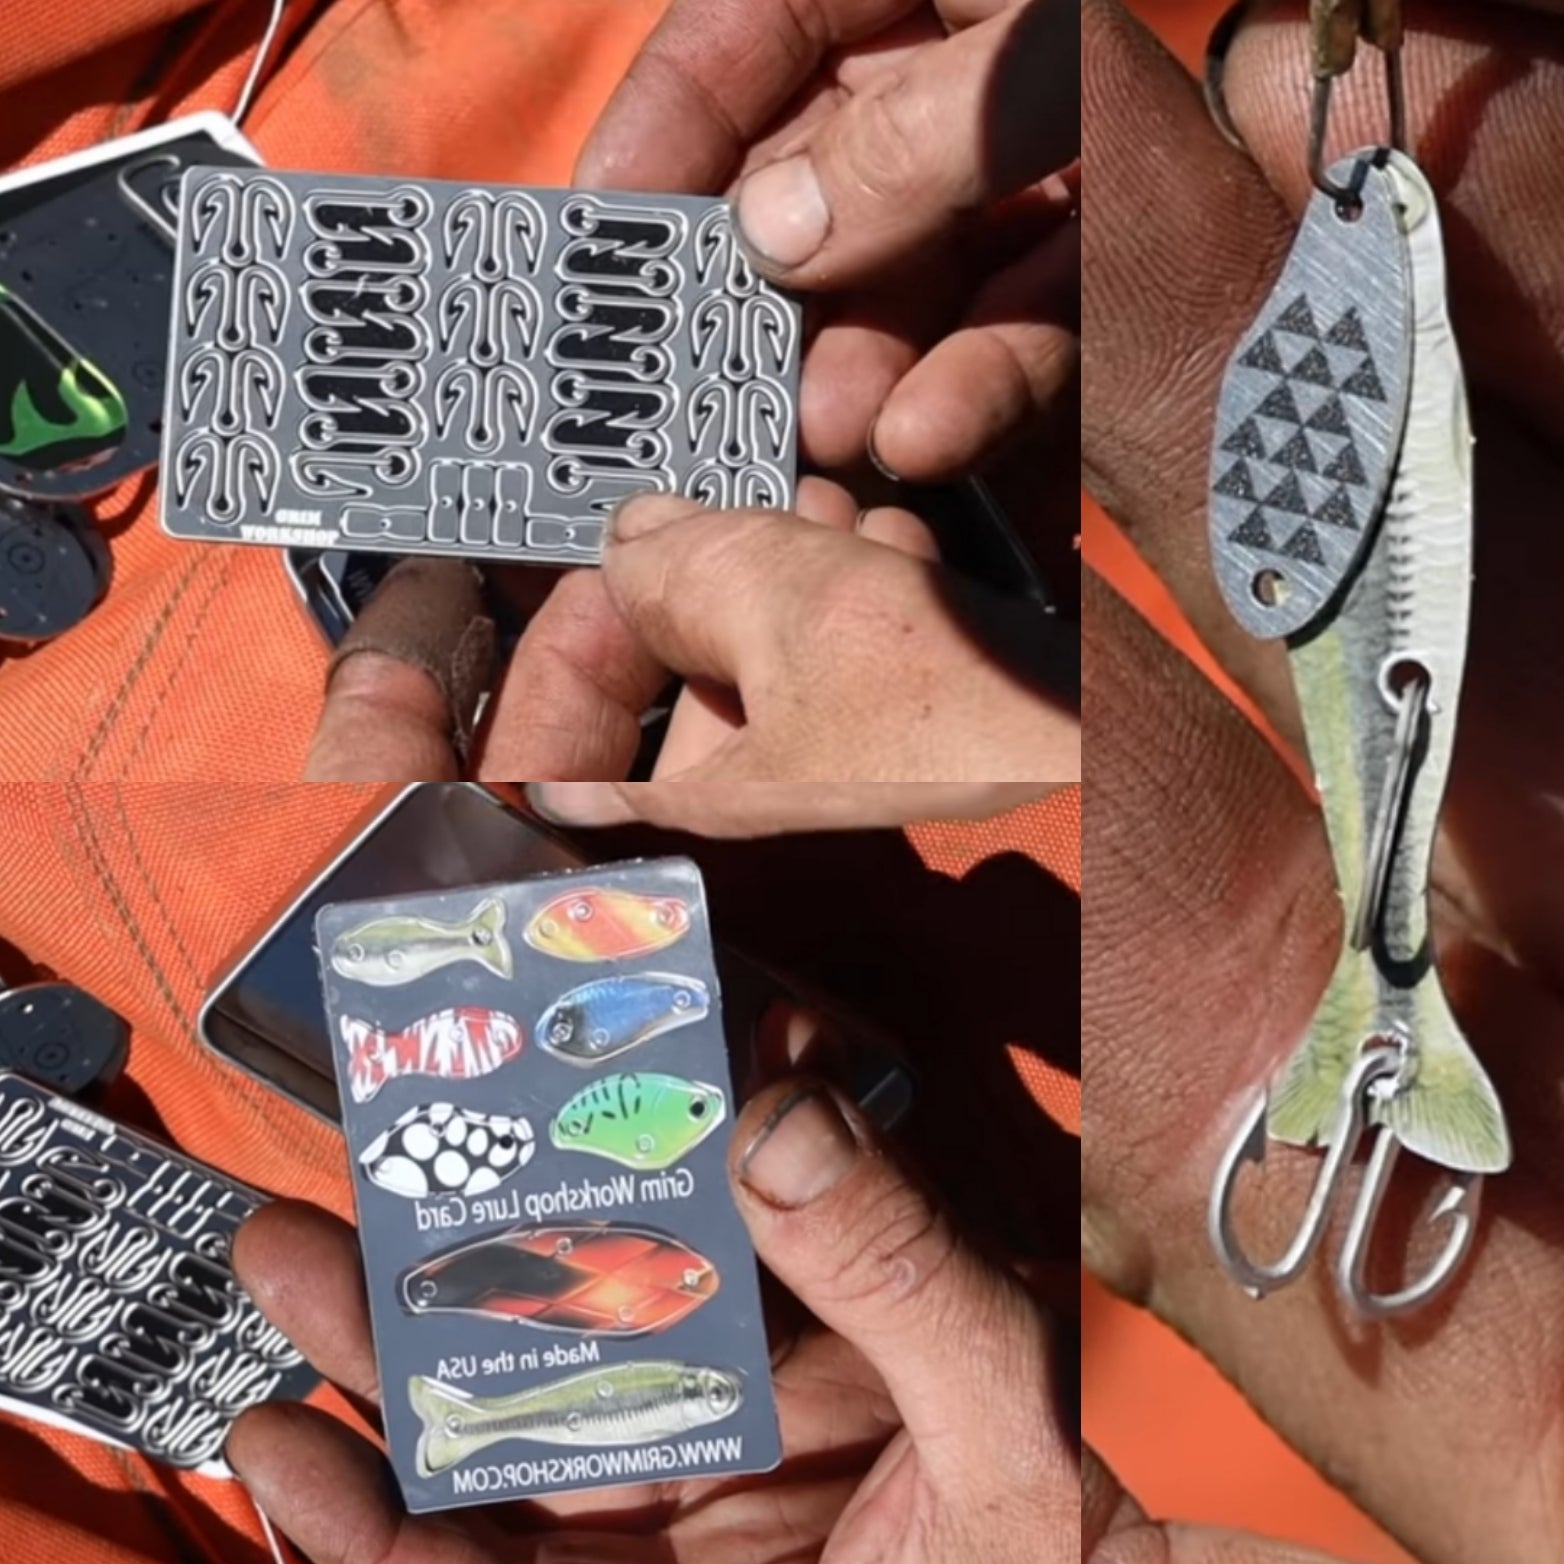 Ultra Compact Survival Emergency Fishing Kit 